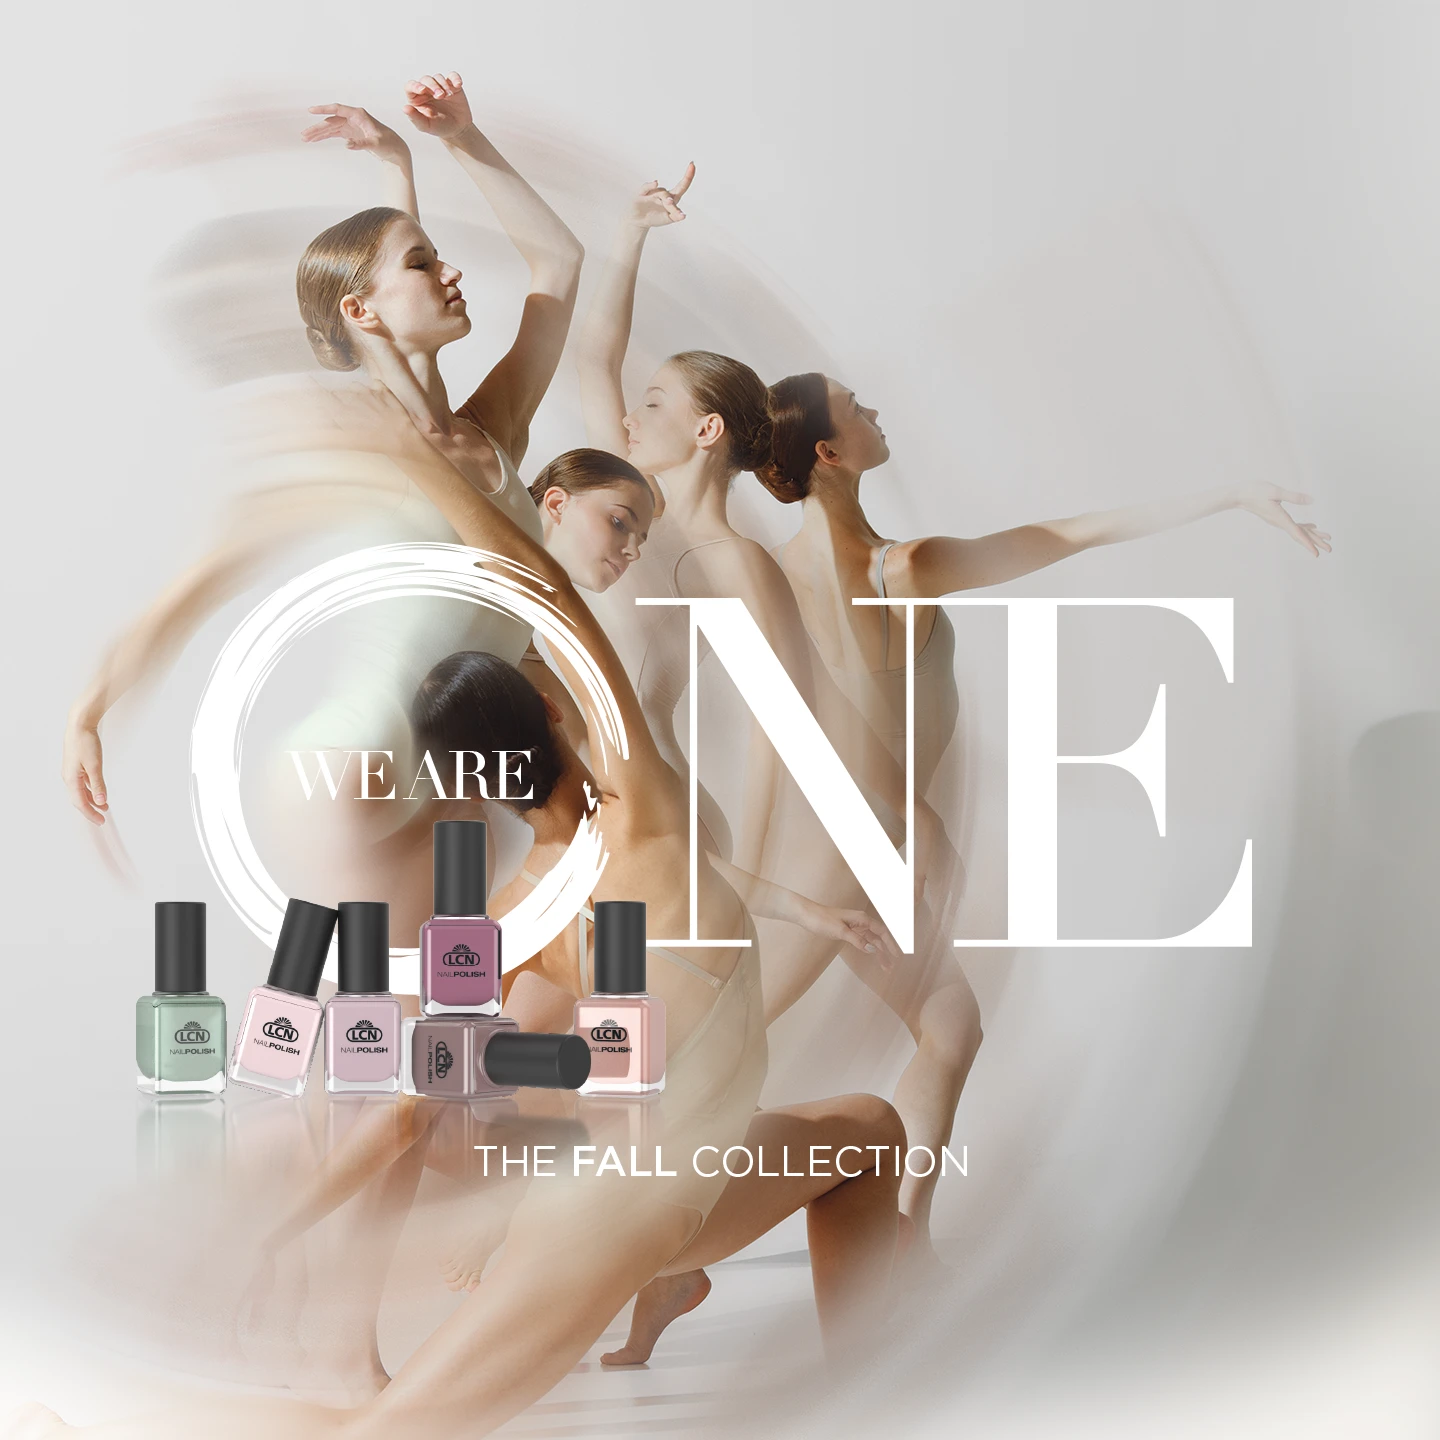 https://www.lcn-shop.de/we-are-one-the-fall-collection